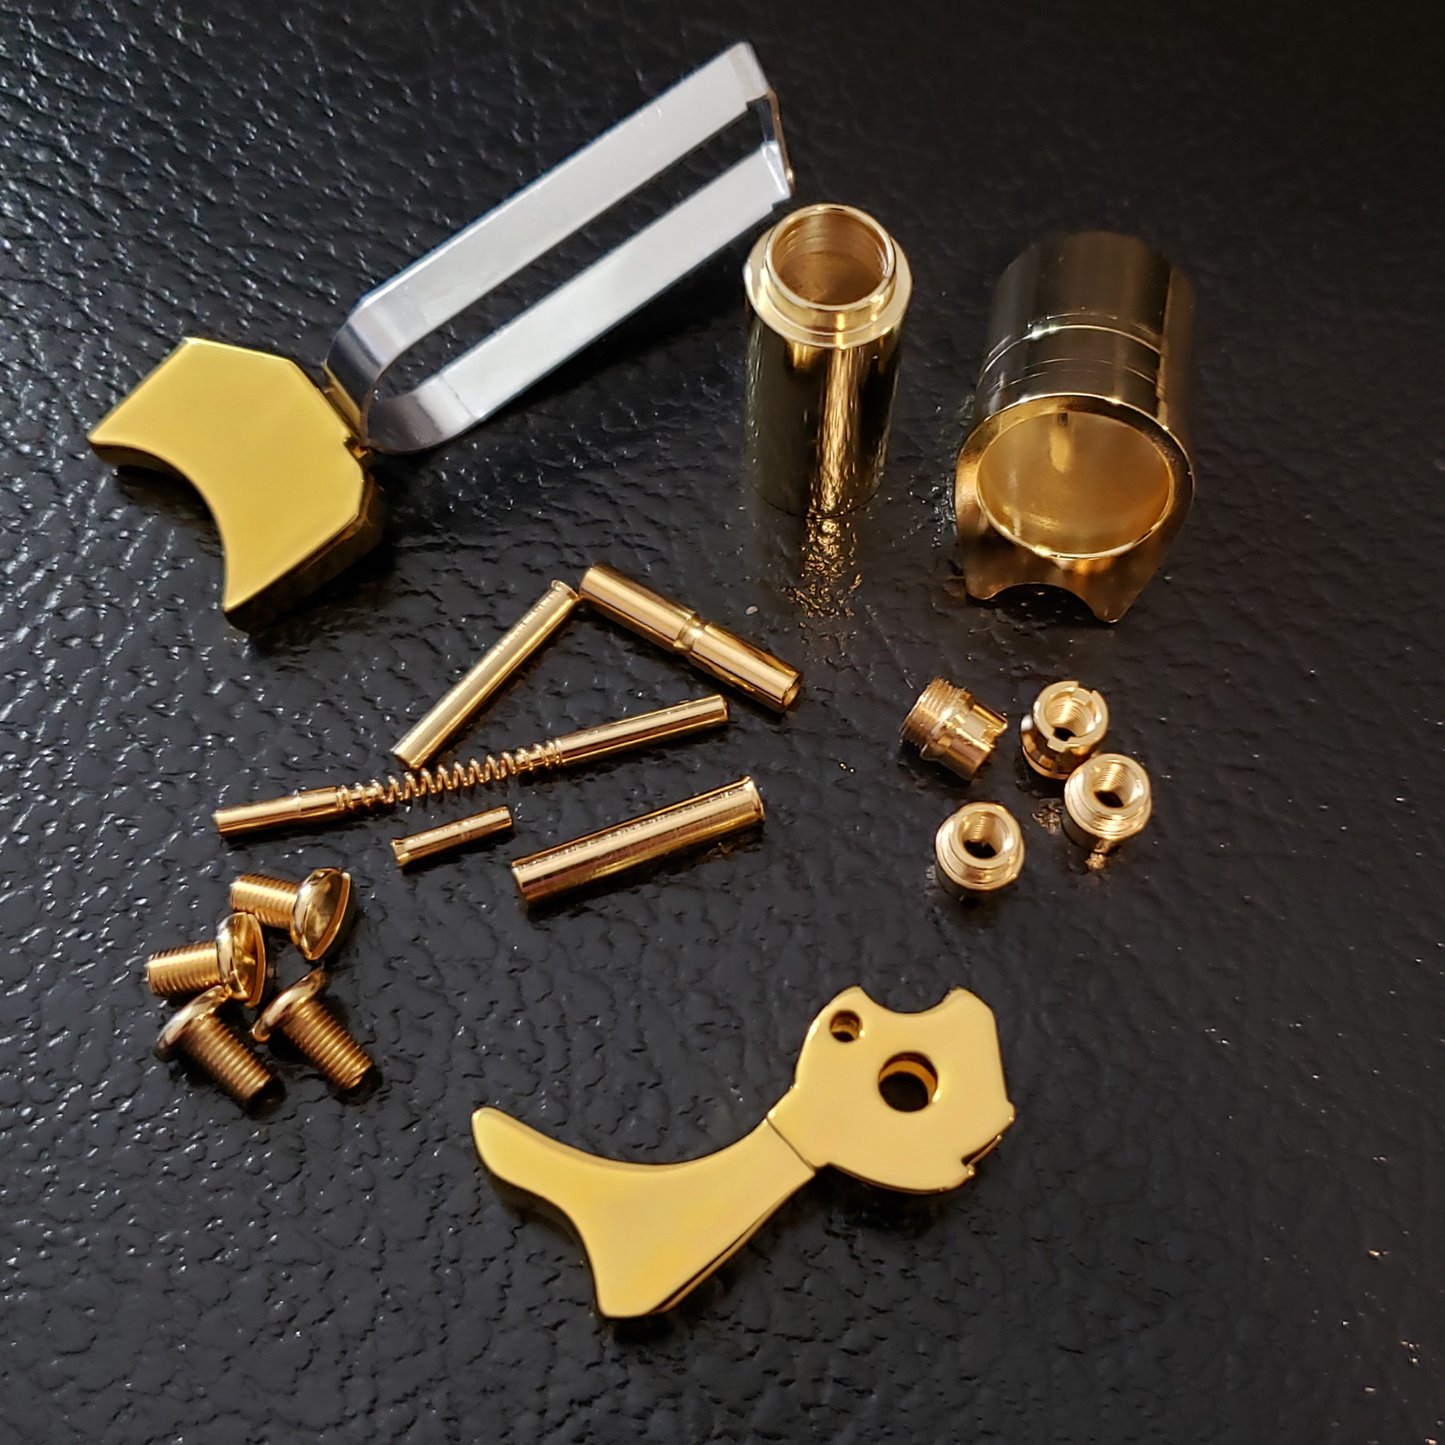 1911 Parts Steel Polished 24K Real Gold 45ACP 38 super 9mm - MUZZLE MAN